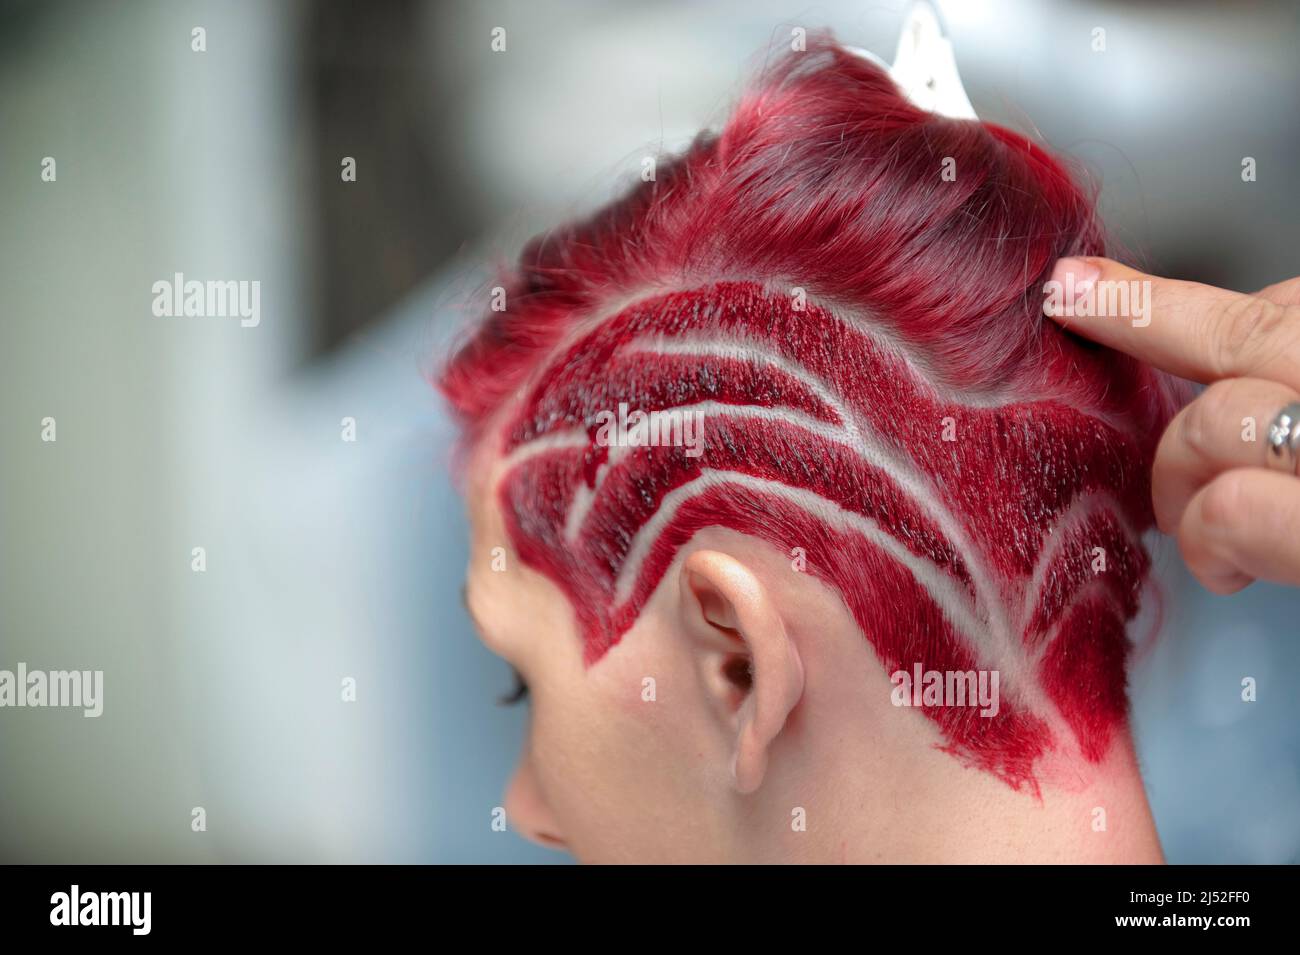 Hairstylist working on a red haircut Stock Photo